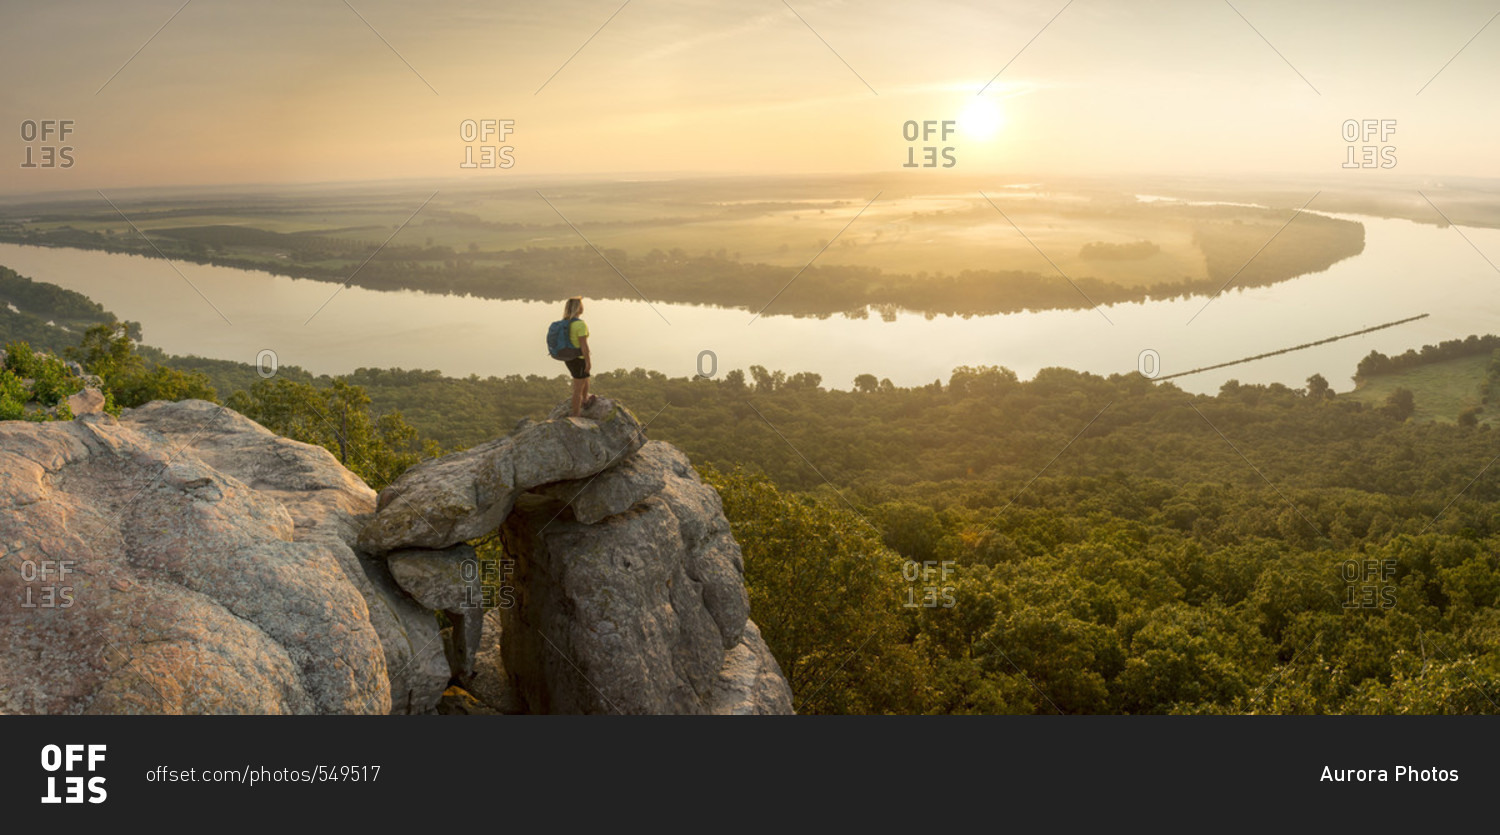 Woman standing on sandstone overhang watching sunrise from summit of Petit Jean Mountain above Arkansas River Valley